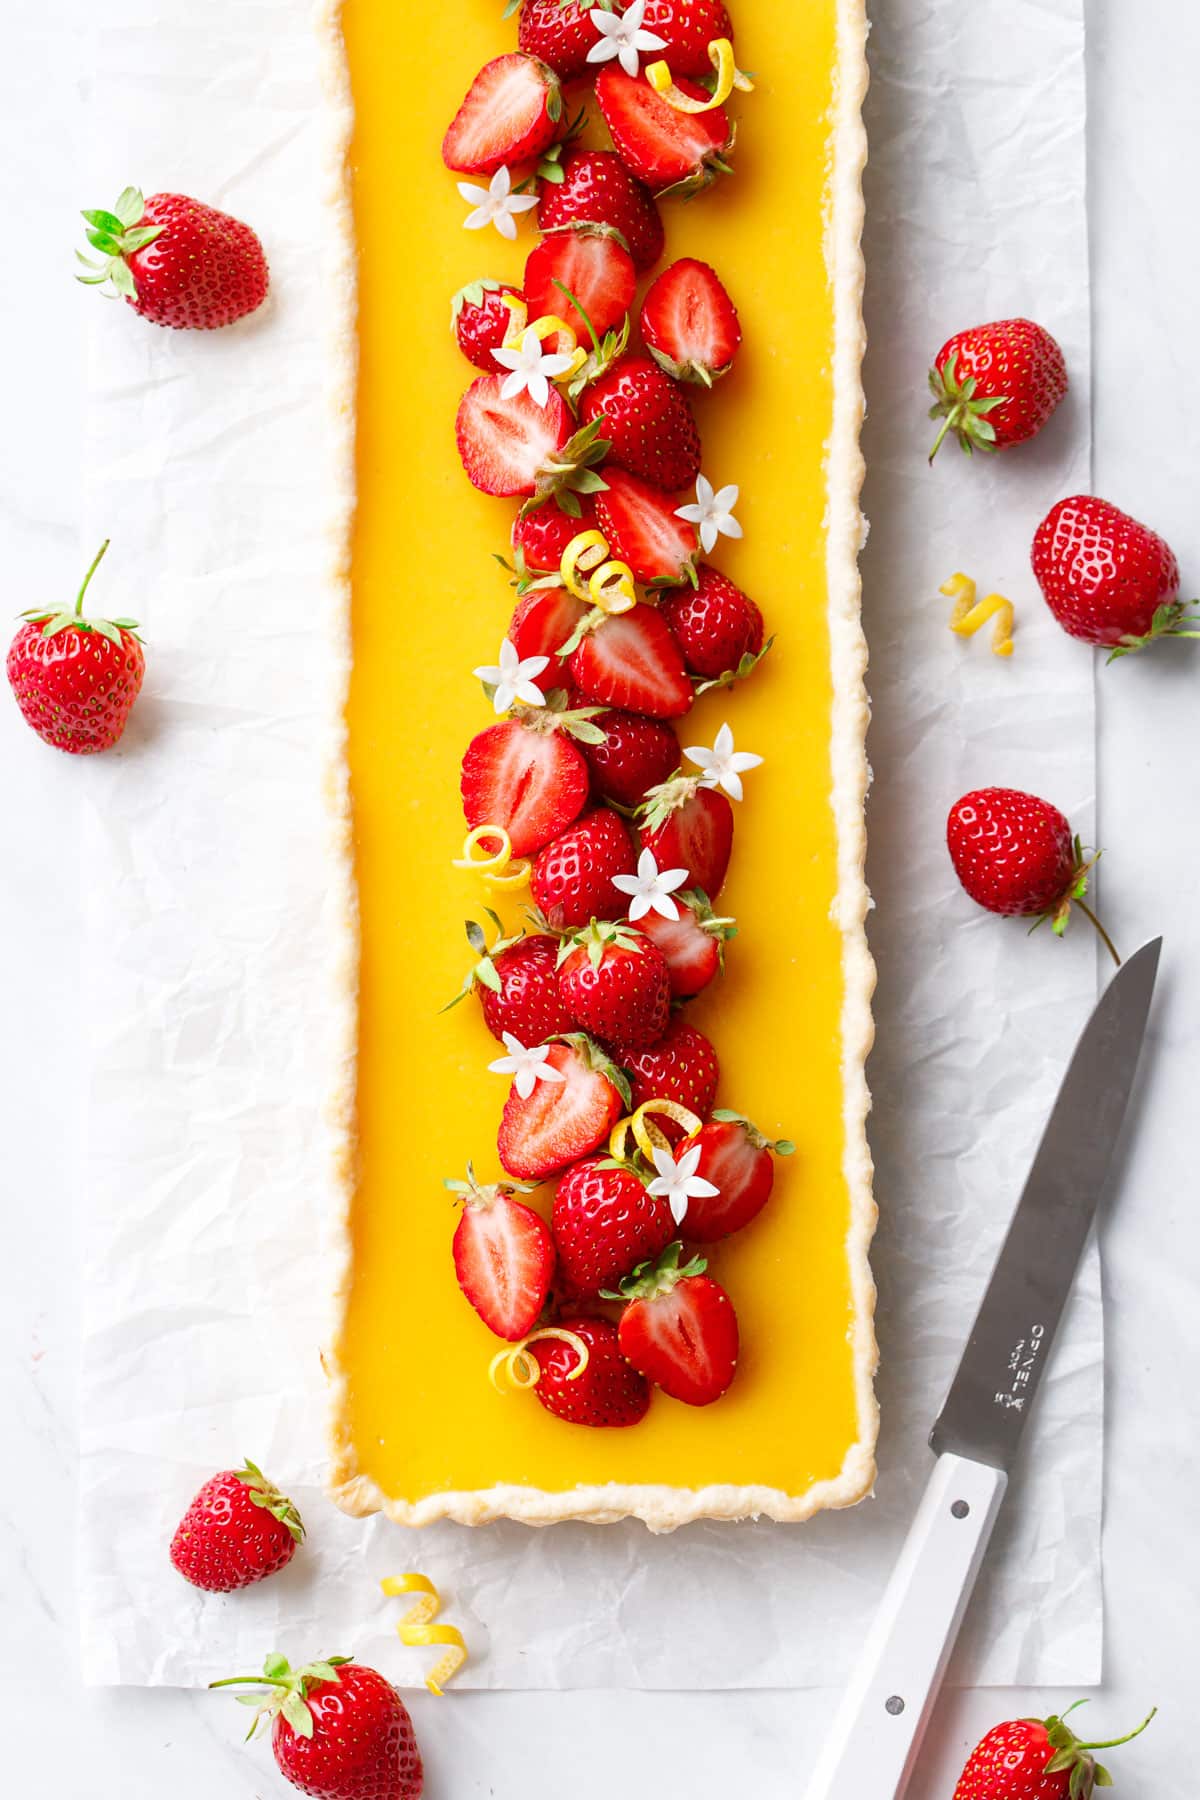 Overhead, rectangular Strawberry Meyer Lemon Tart that is bright yellow with fresh strawberries down the center, with twists of lemon peel and edible flowers.